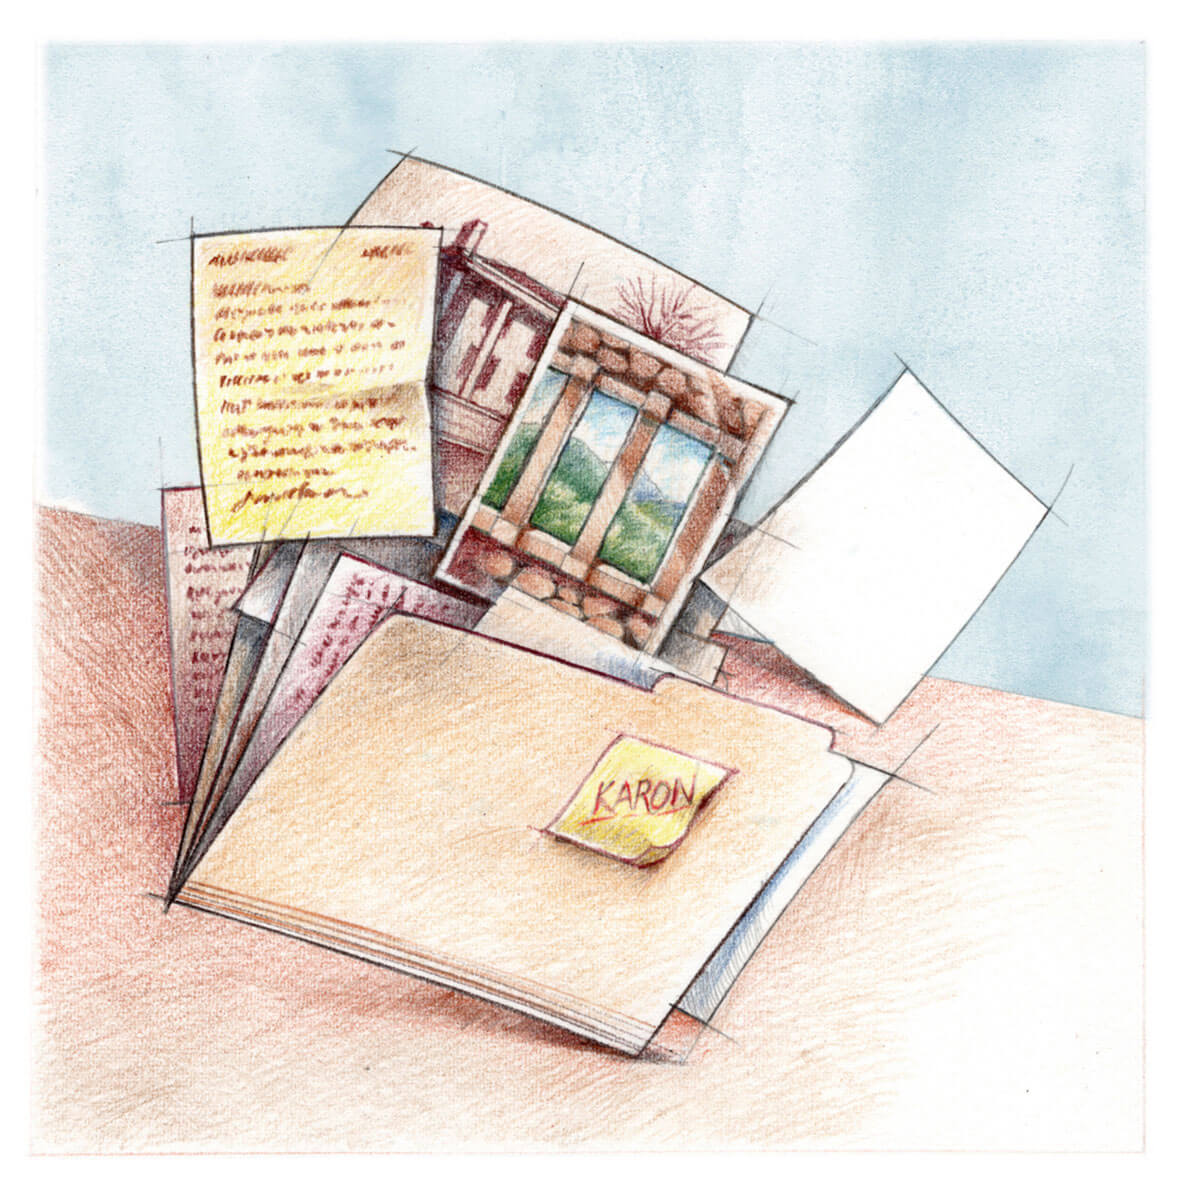 Illustration in soft lines and colors, depicting manilla folder loosely containing handwritten pages and imagery. Folder is labeled Karon. 